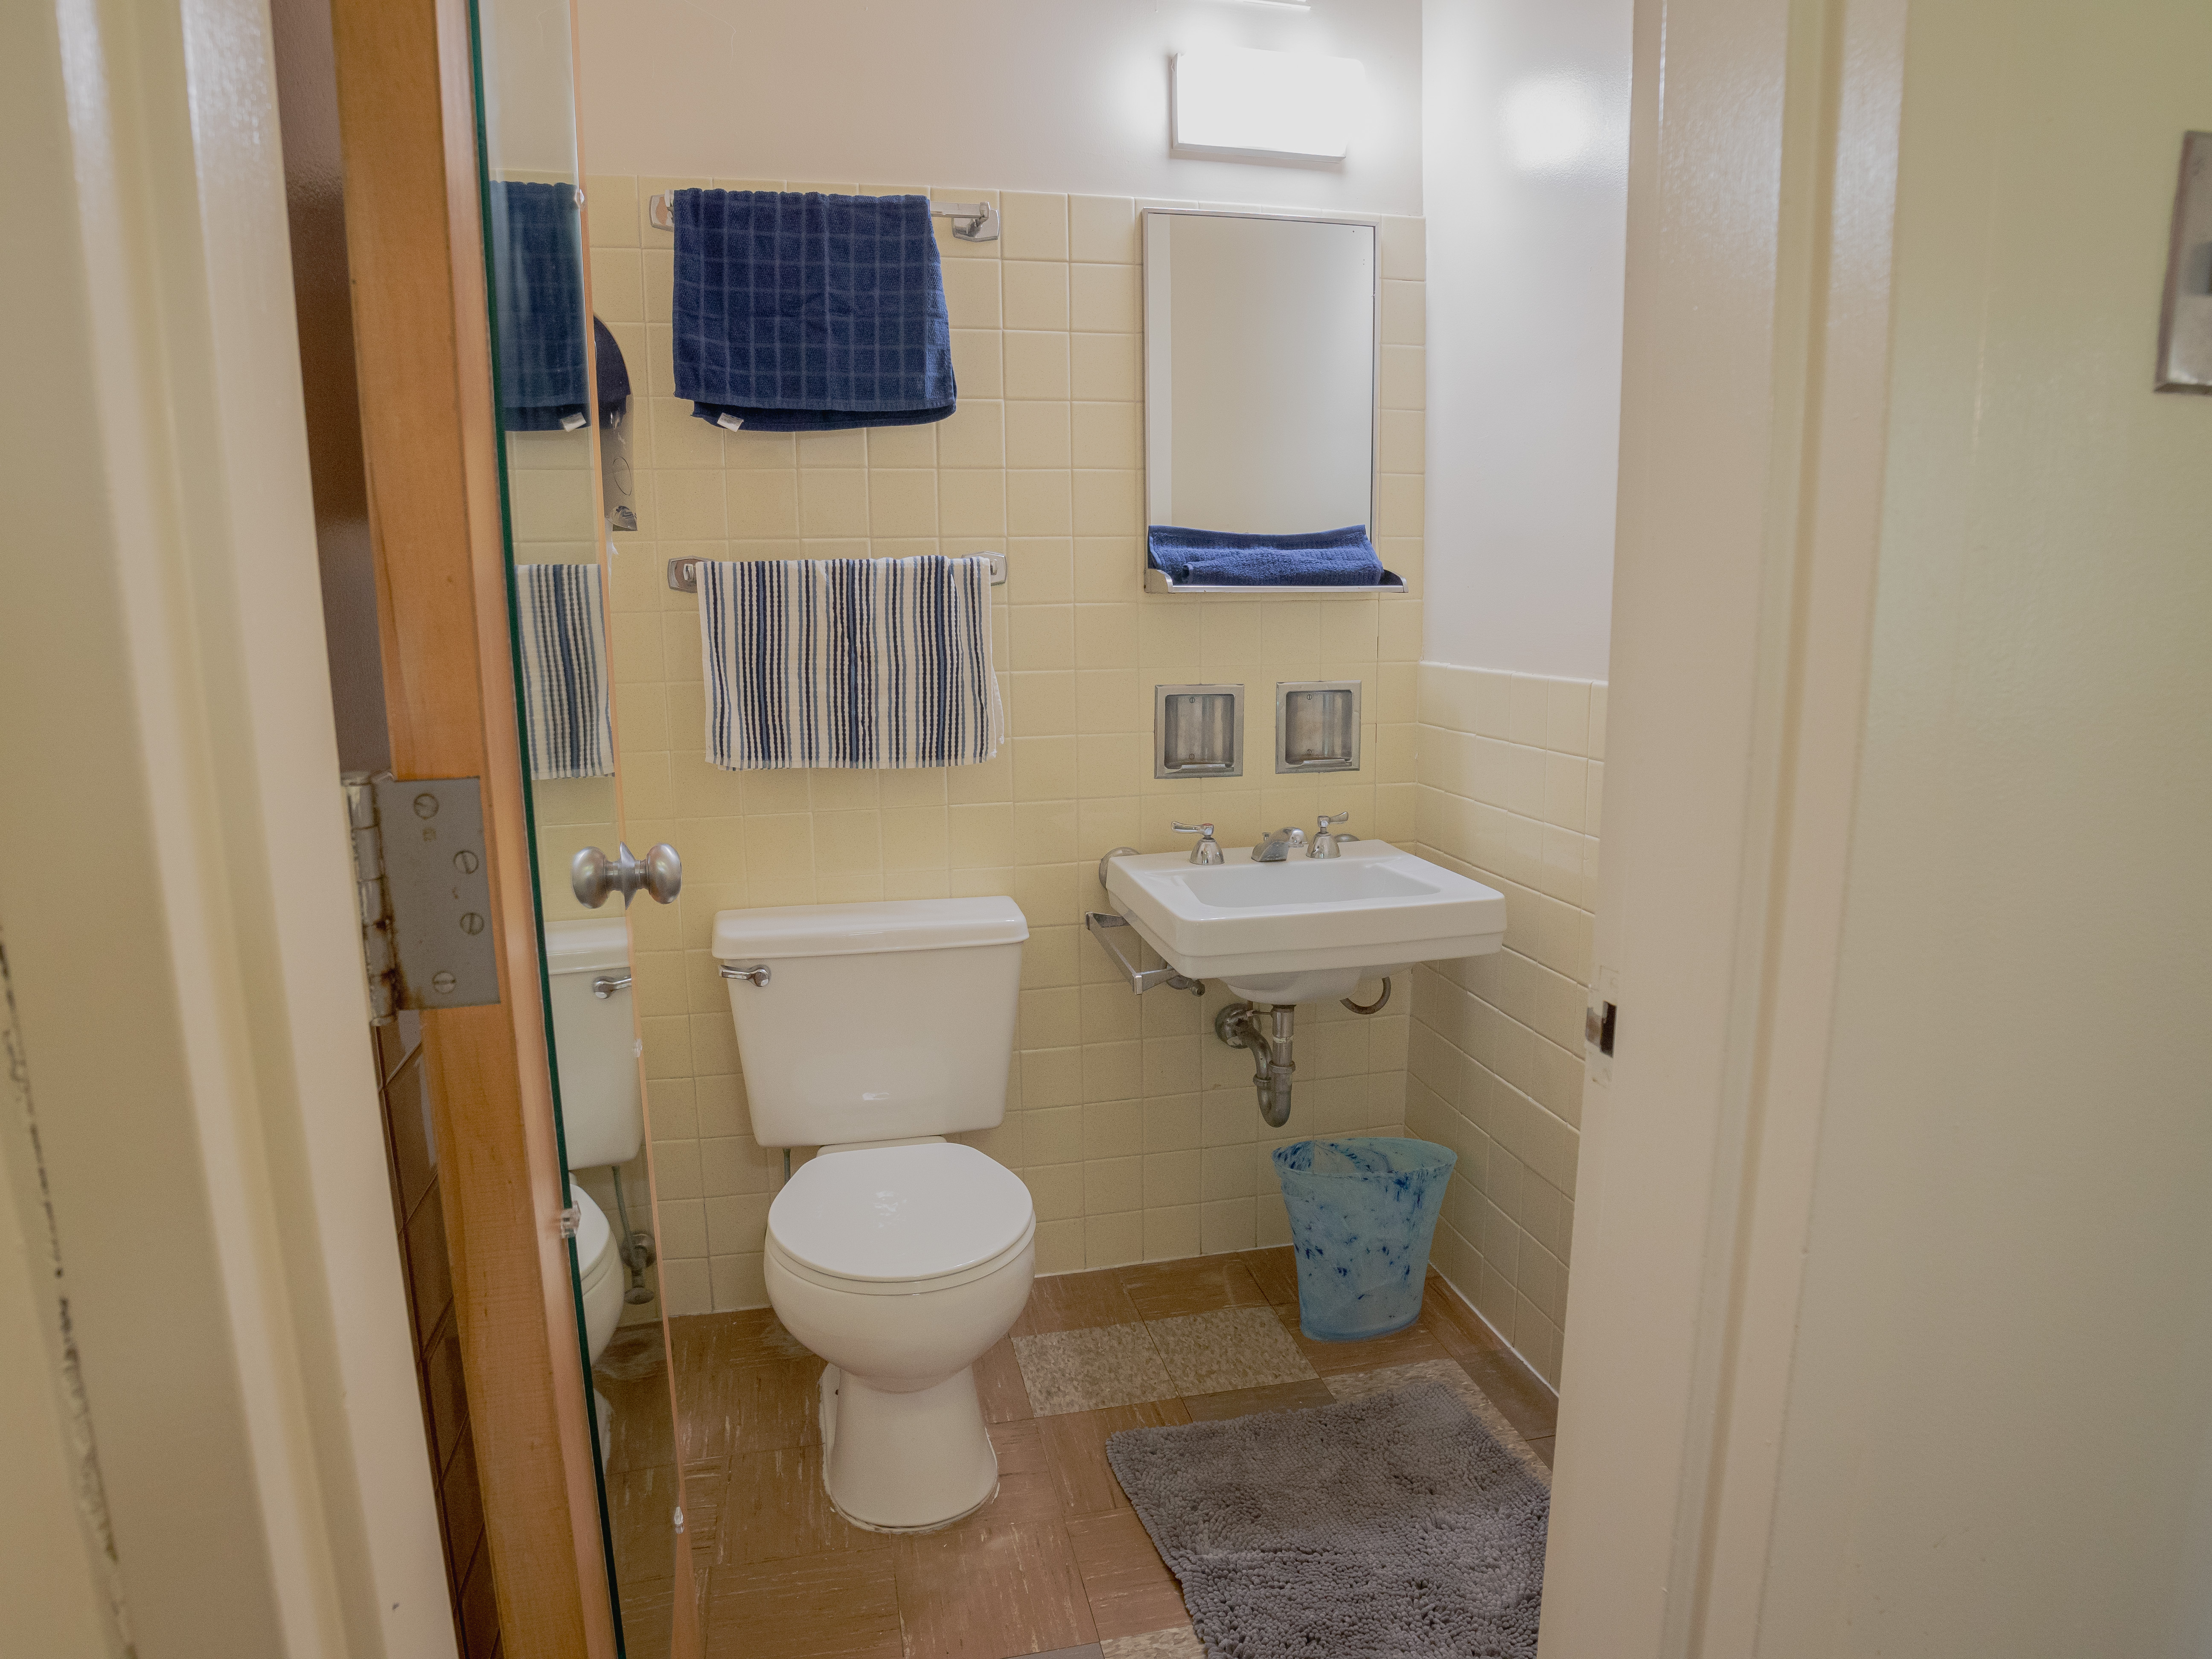 Picture of Canavan Hall sink and toilet area in bathroom.